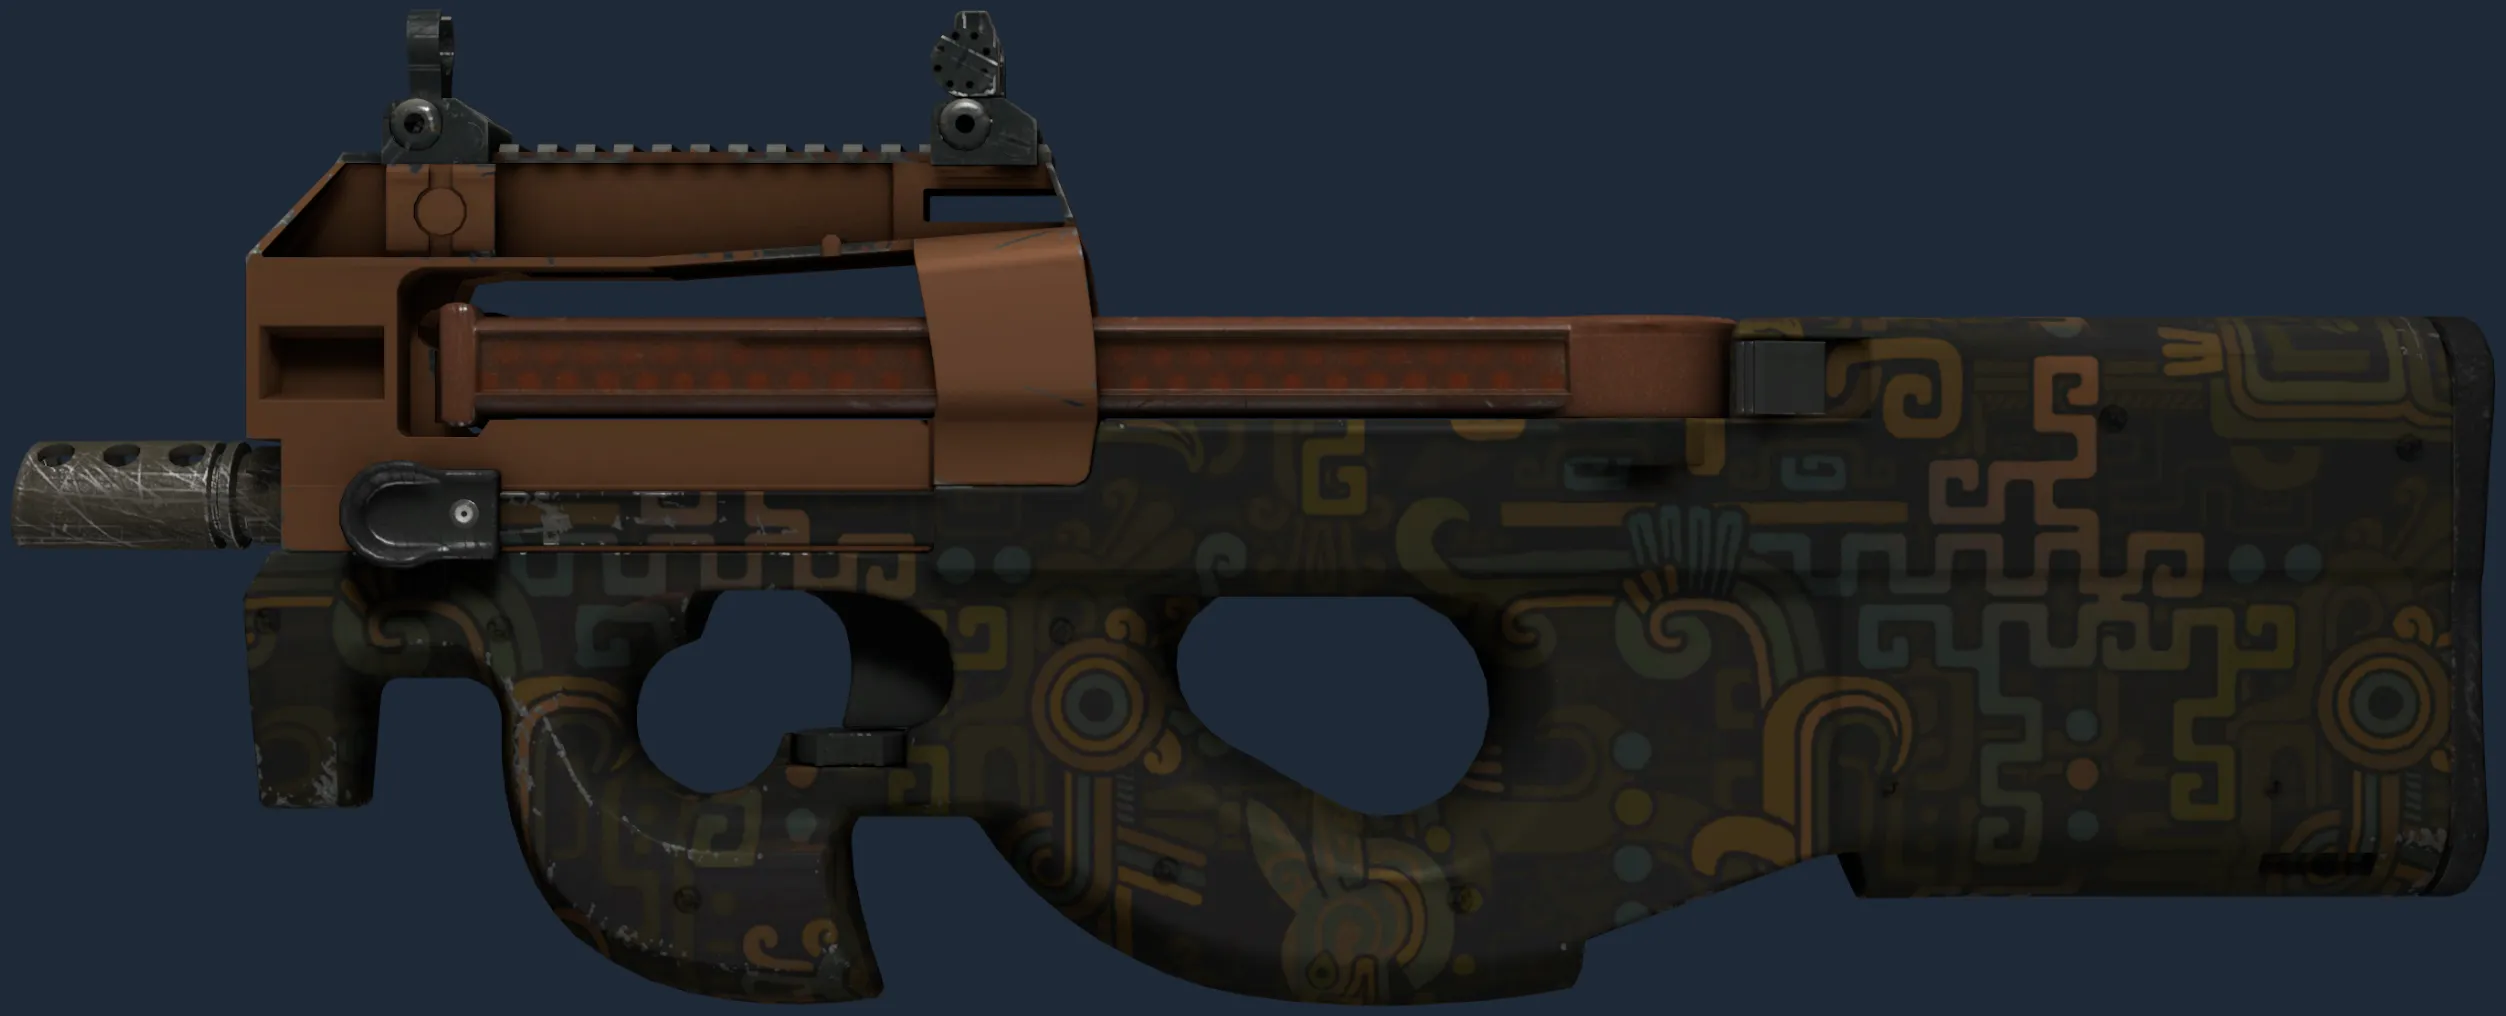 P90 | Ancient Earth